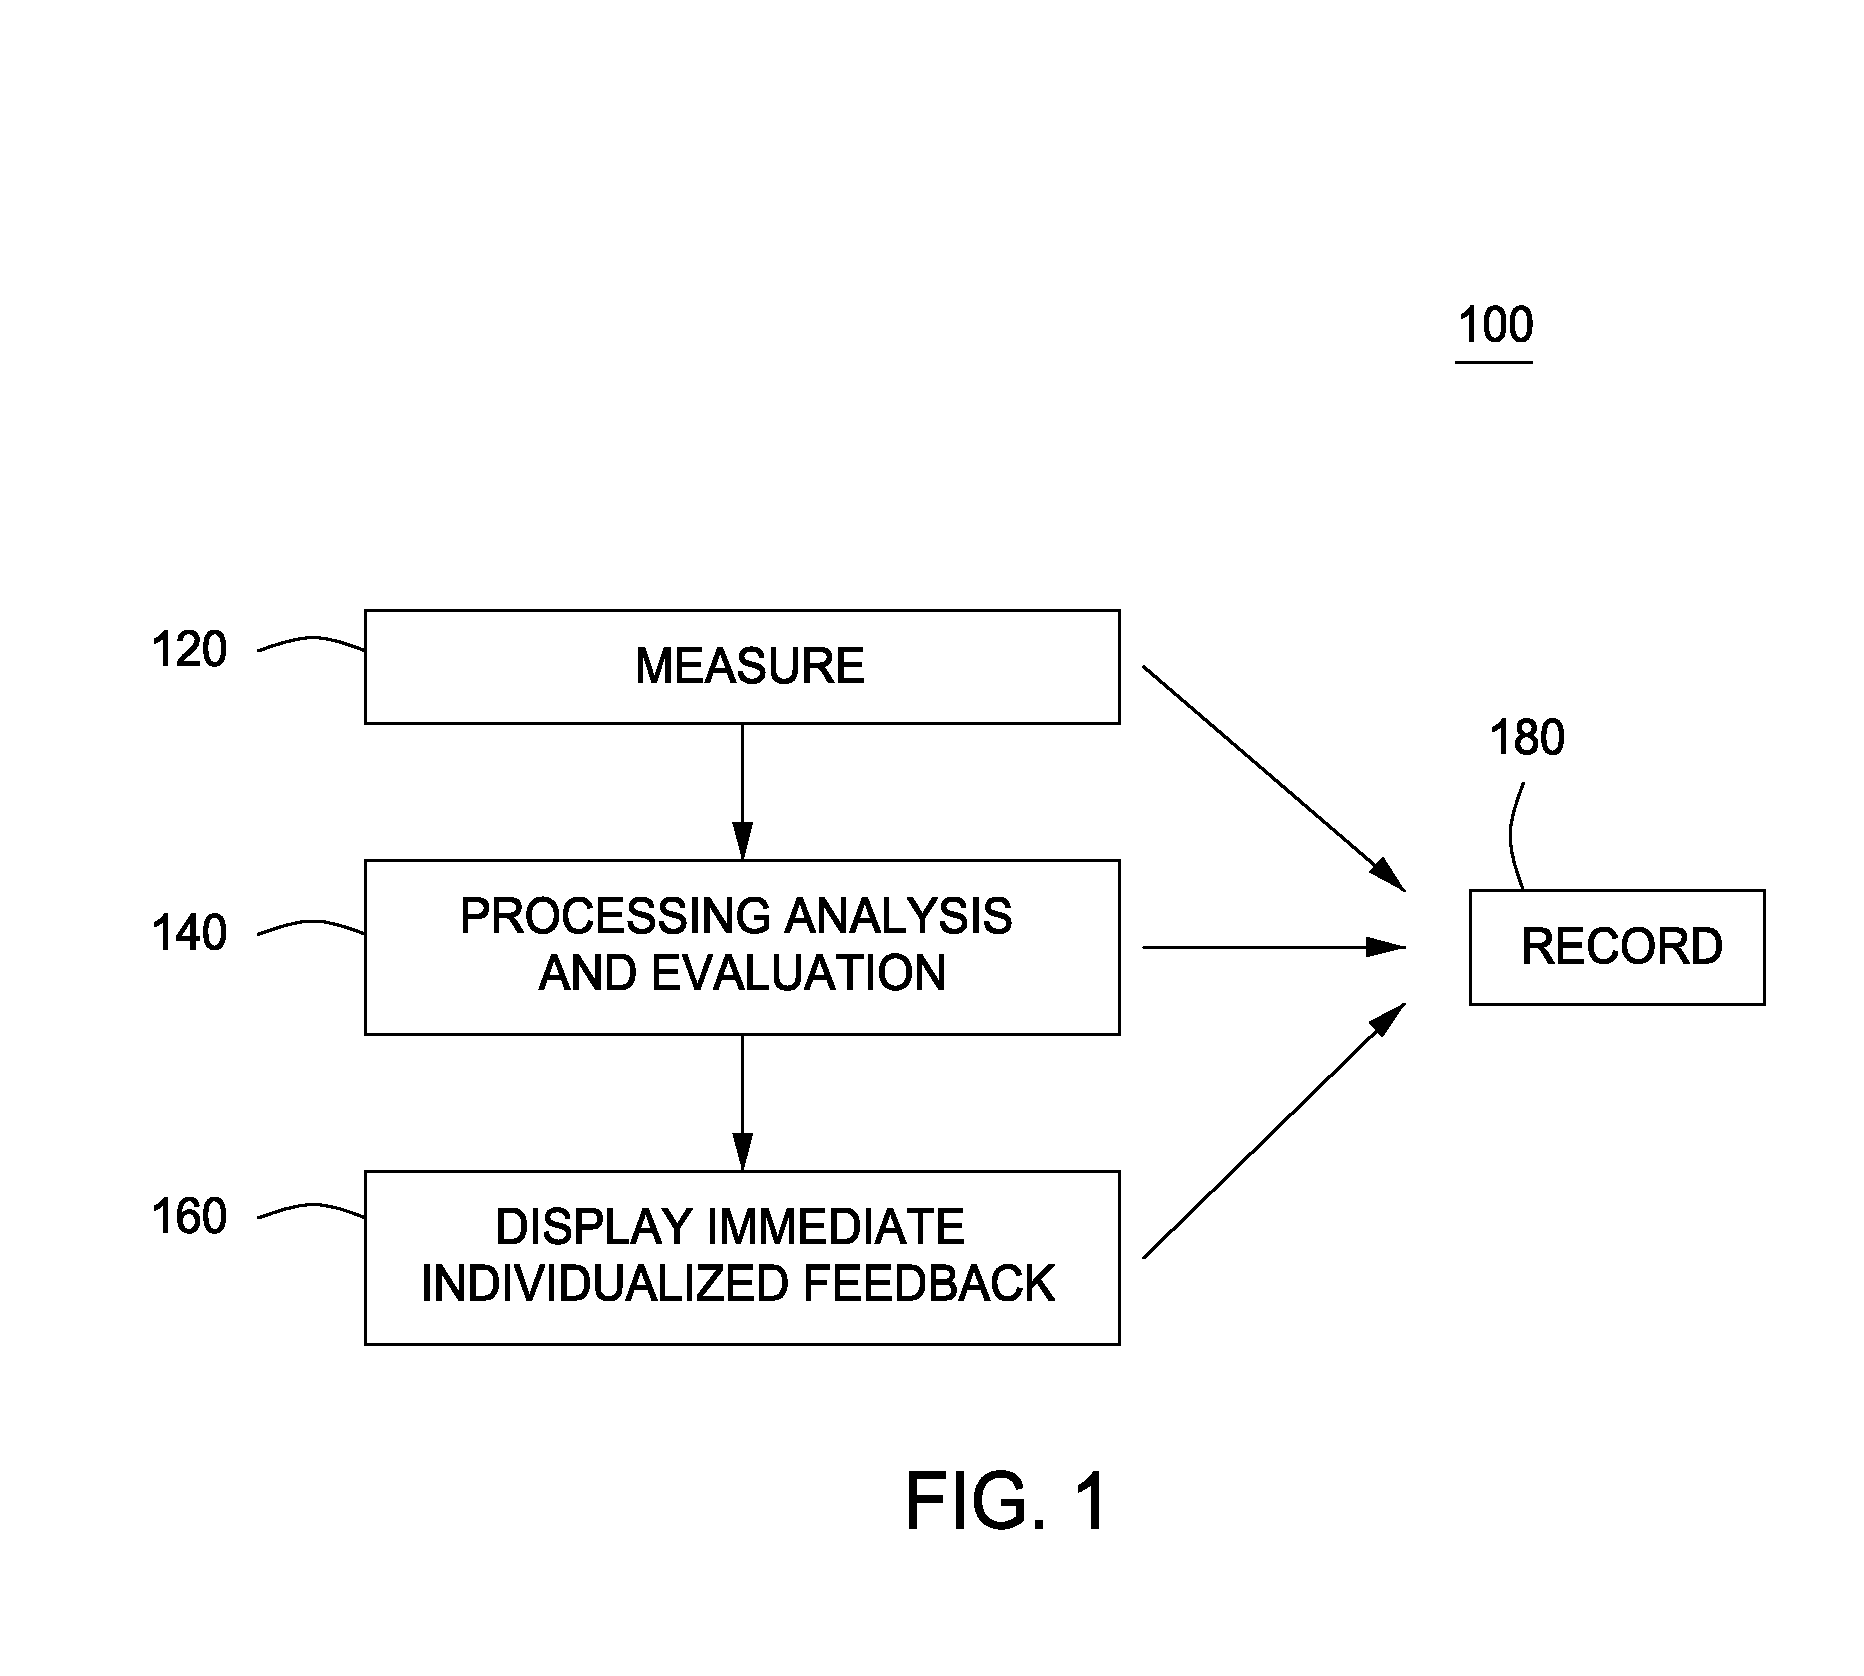 Systems and methods for measuring, analyzing, and providing feedback for movement in multidimensional space